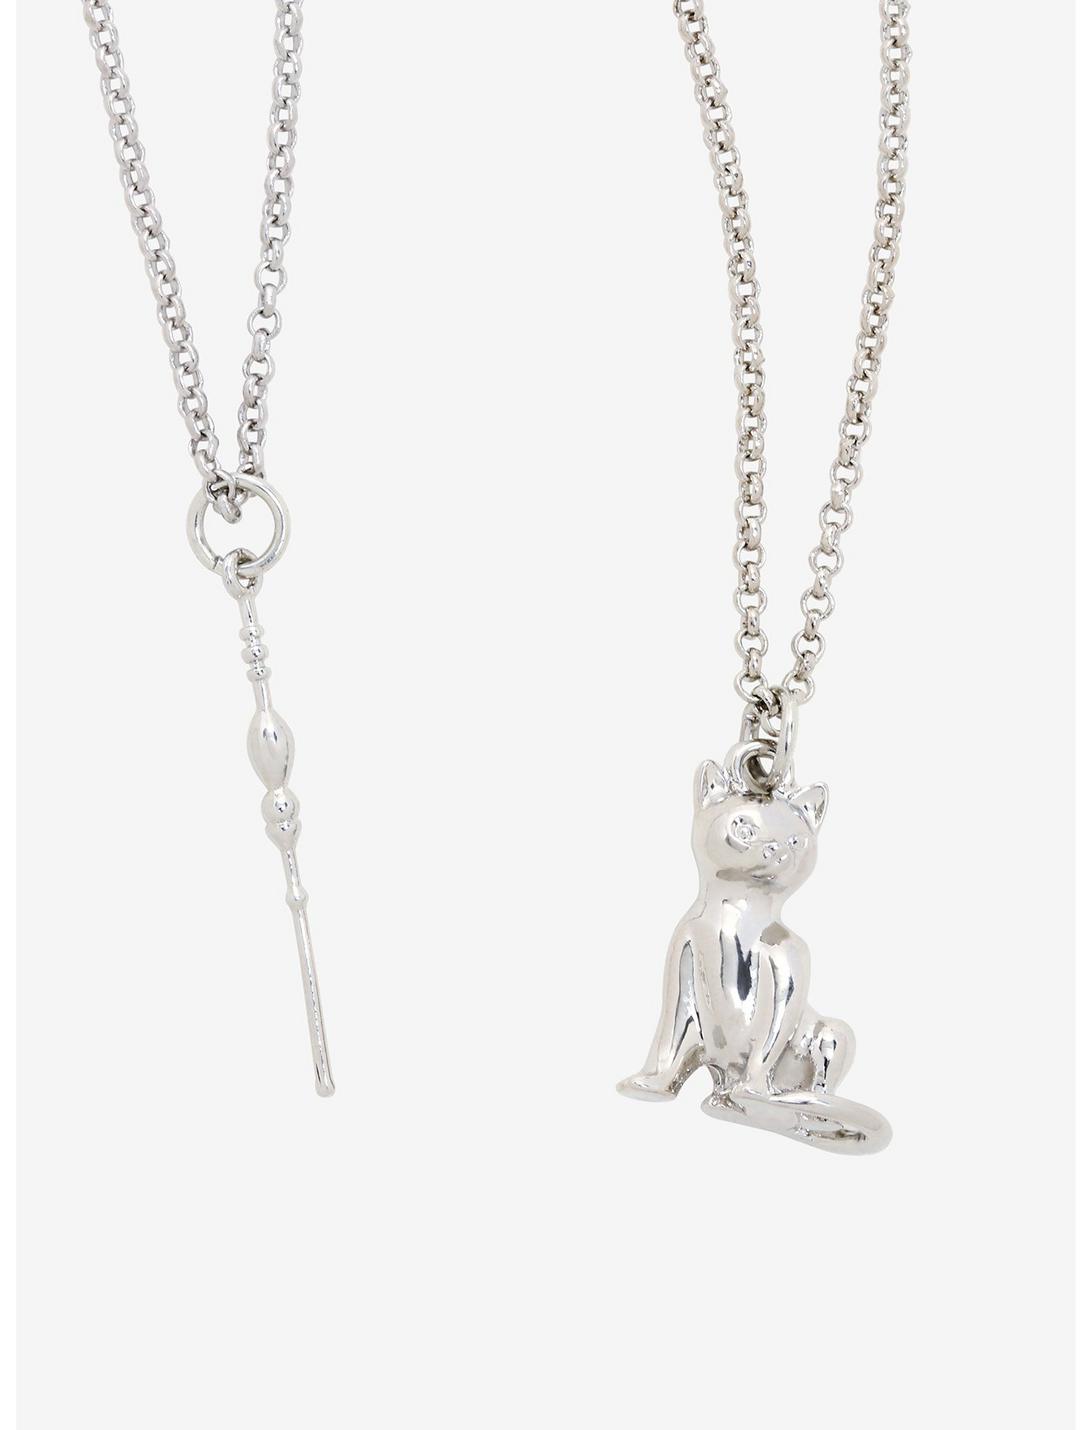 Harry Potter Patronus Fashion Necklace Set with Wand and Animal 